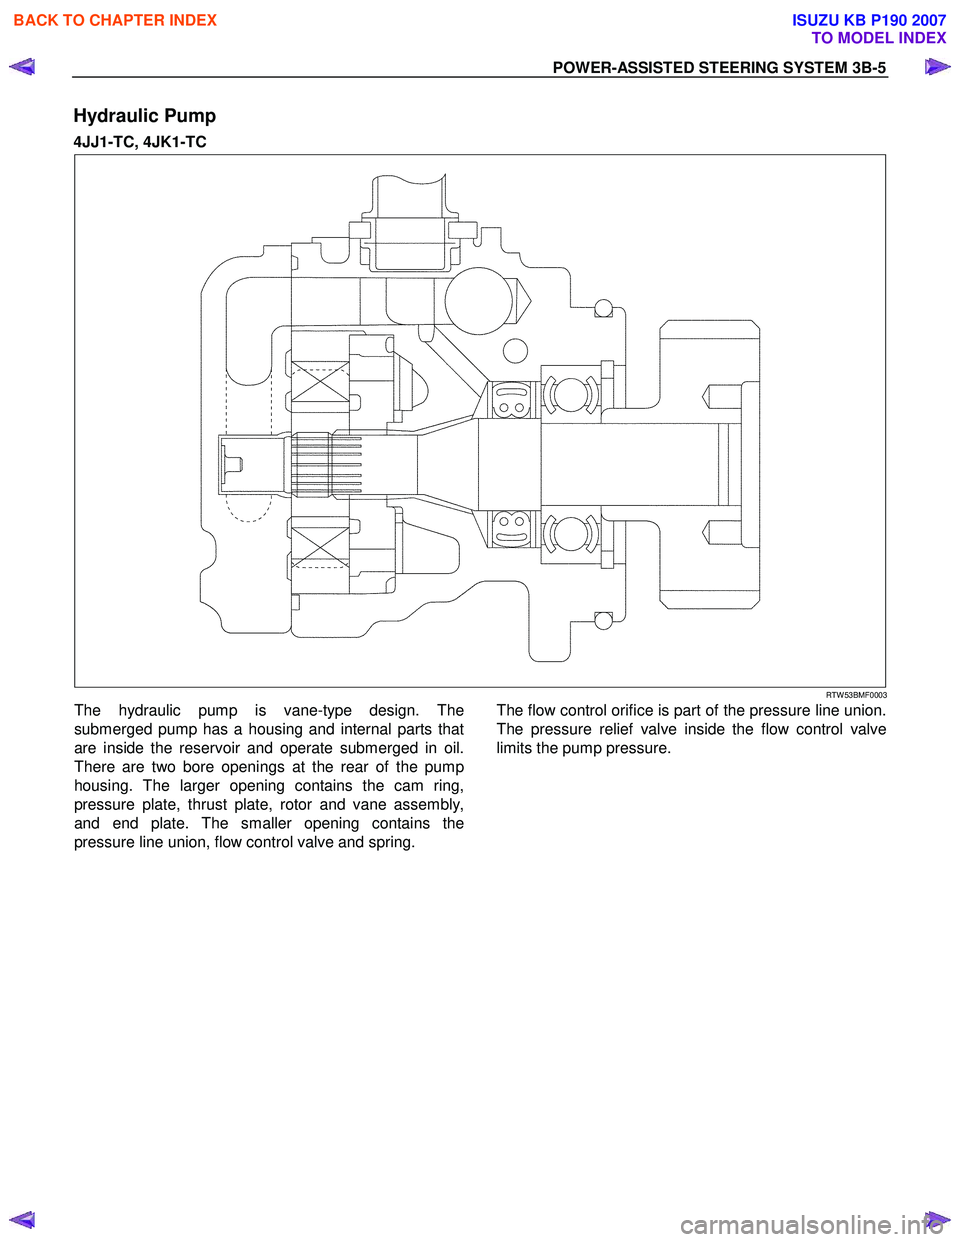 ISUZU KB P190 2007  Workshop Repair Manual POWER-ASSISTED STEERING SYSTEM 3B-5 
Hydraulic Pump 
4JJ1-TC, 4JK1-TC  
 
 
 
 
RTW 53BMF0003 
The hydraulic pump is vane-type design. The 
submerged pump has a housing and internal parts that
are ins